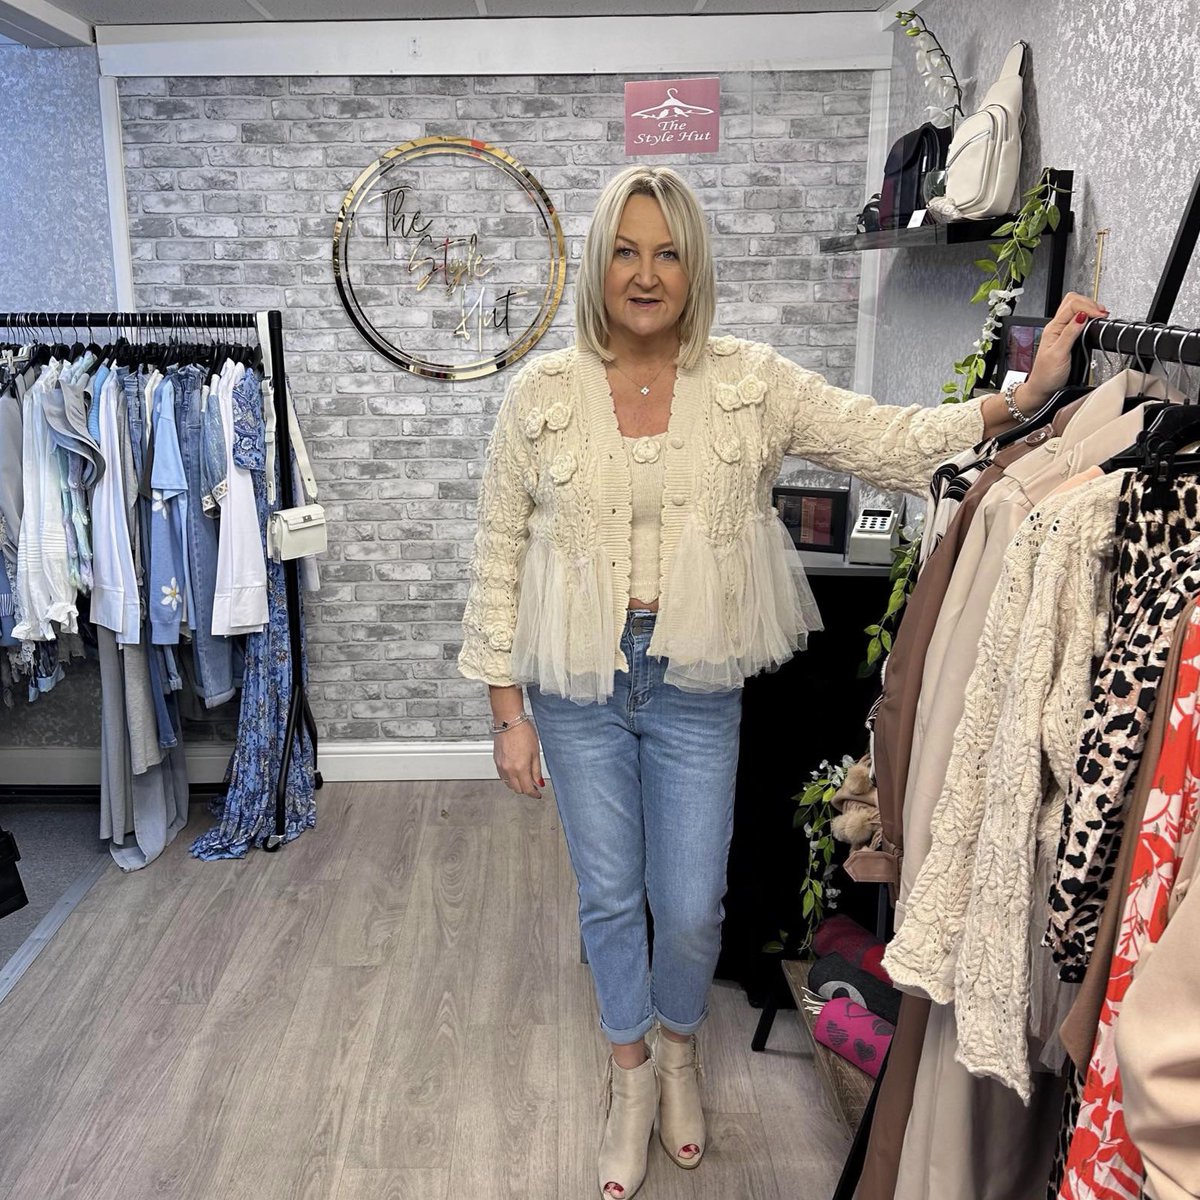 📣 Calling all fashionistas! Claire at Style Hut in Northwich Indoor Market has just stocked up on the latest ladies' fashion pieces. 🛍️ Come down and add a dash of fab to your wardrobe. They’re open on Tuesday, Friday, and Saturday from 10am-4pm #Northwich